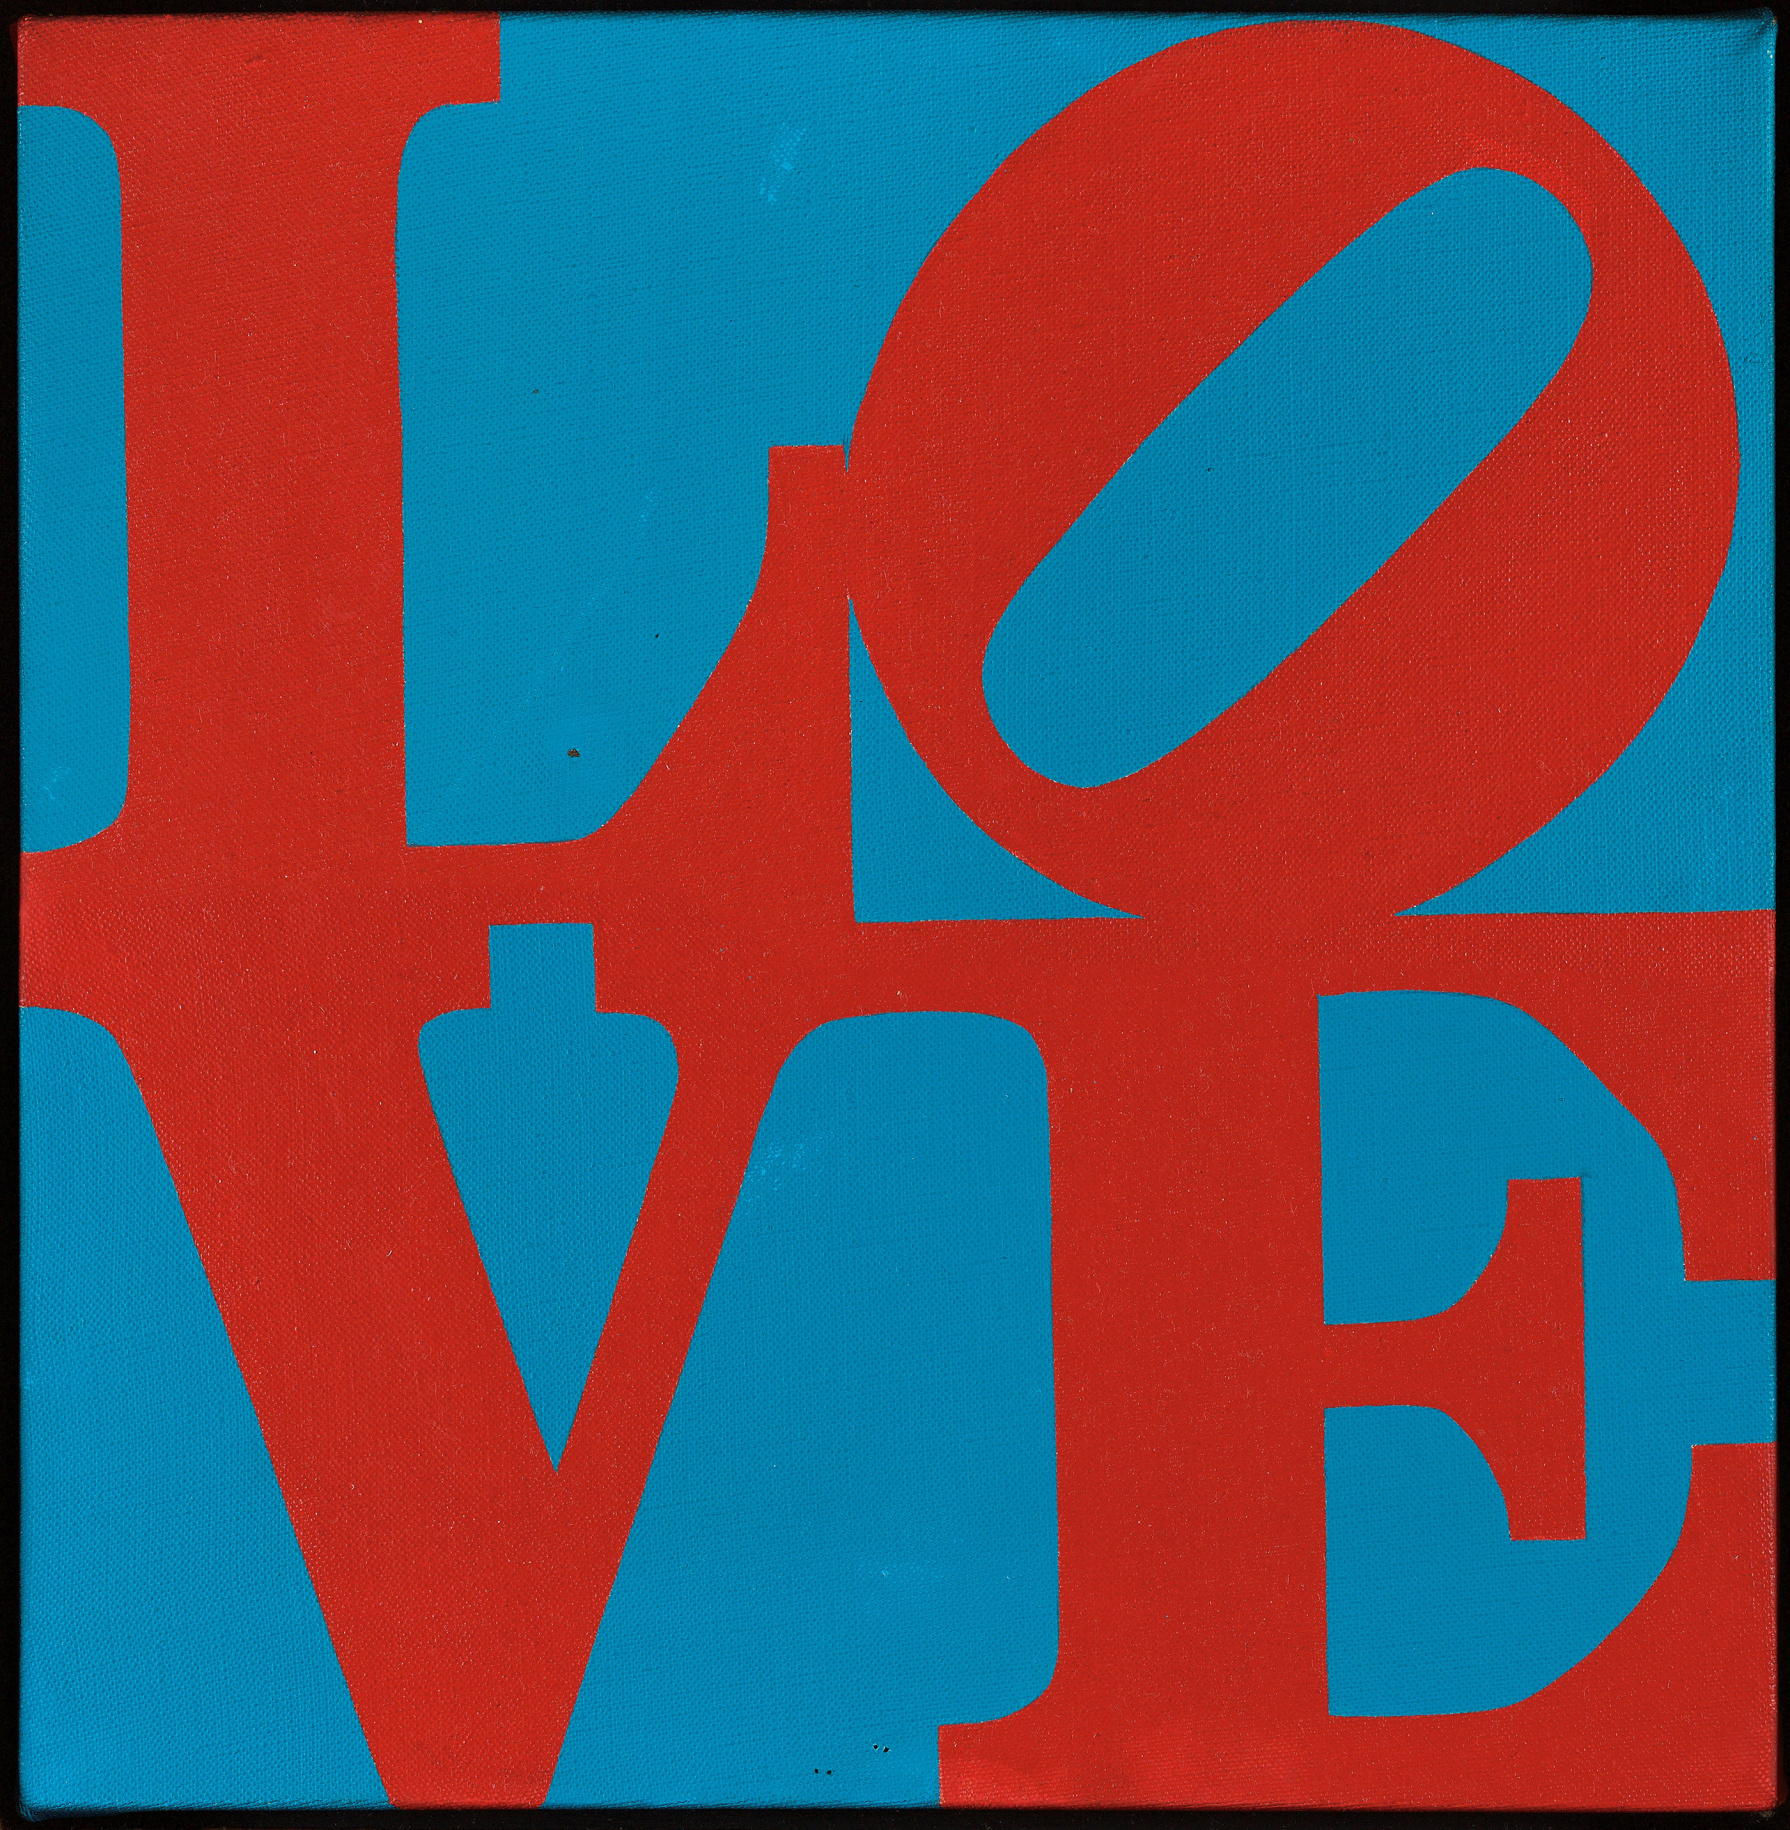 LOVE, a 12-inch square painting with the red letters L and a tilted O stacked above the letters V and E, against a blue background.